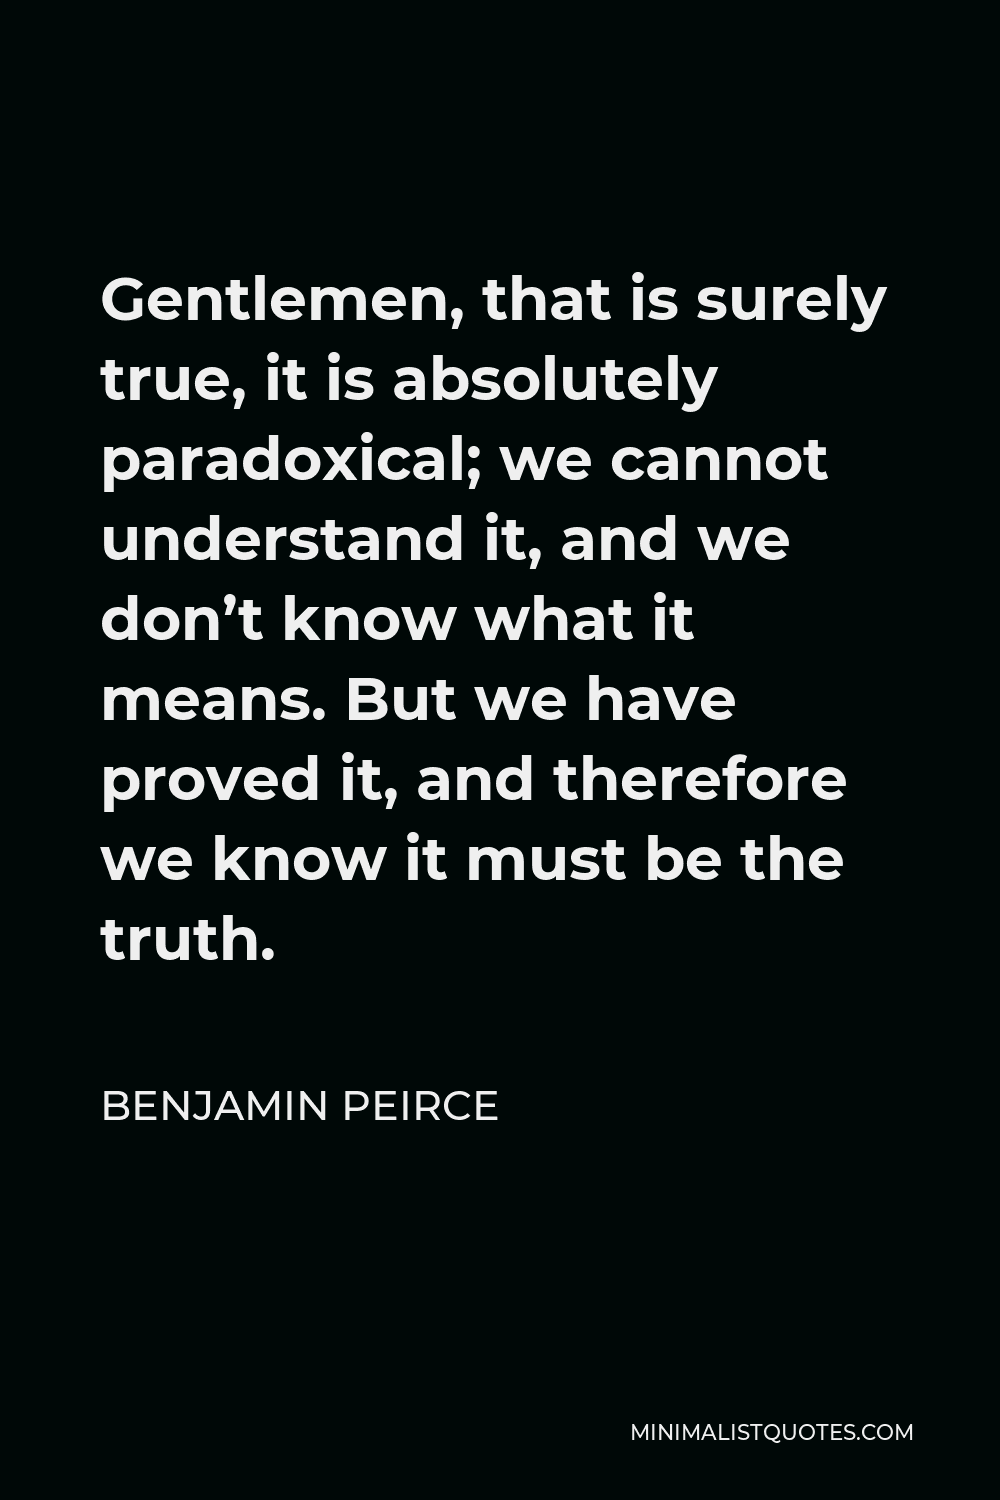 Benjamin Peirce Quote - Gentlemen, that is surely true, it is absolutely paradoxical; we cannot understand it, and we don’t know what it means. But we have proved it, and therefore we know it must be the truth.